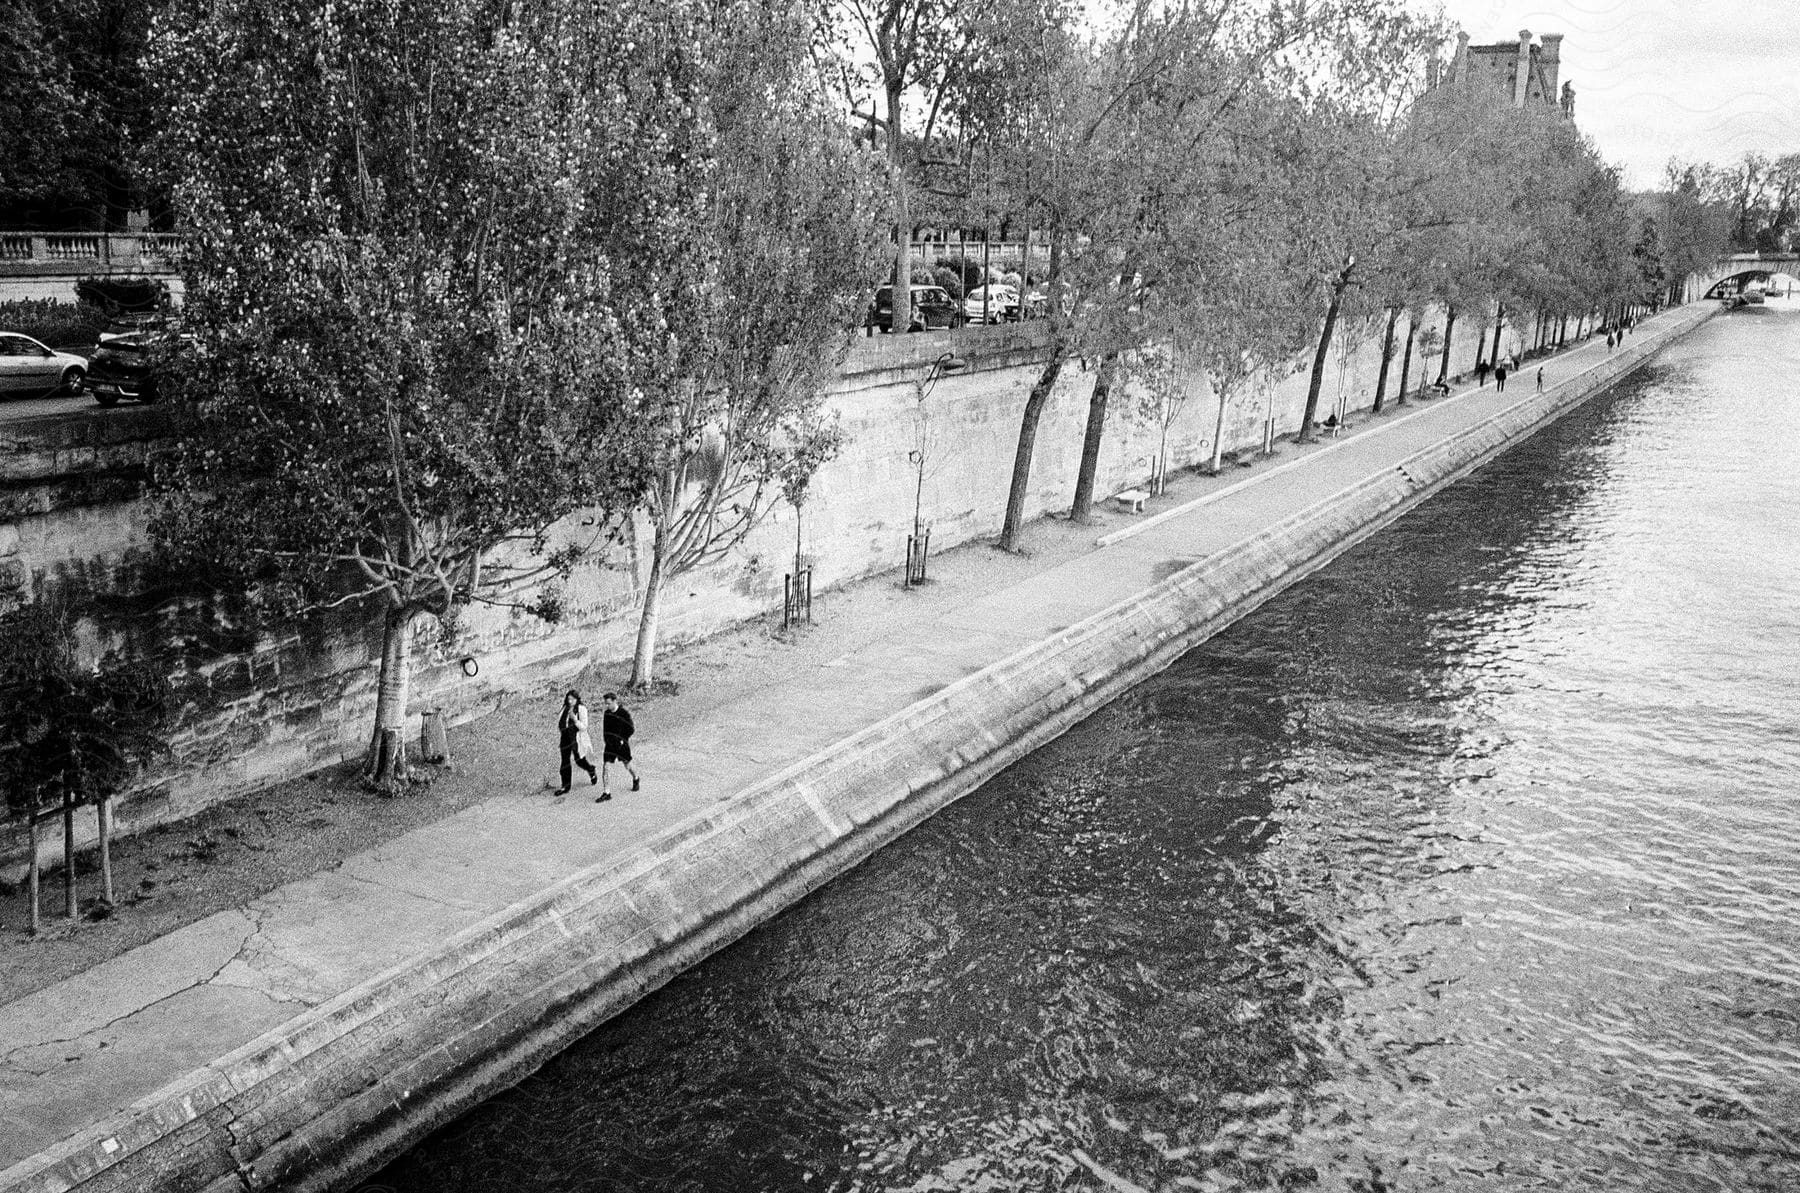 People walking along the Seine river in Paris